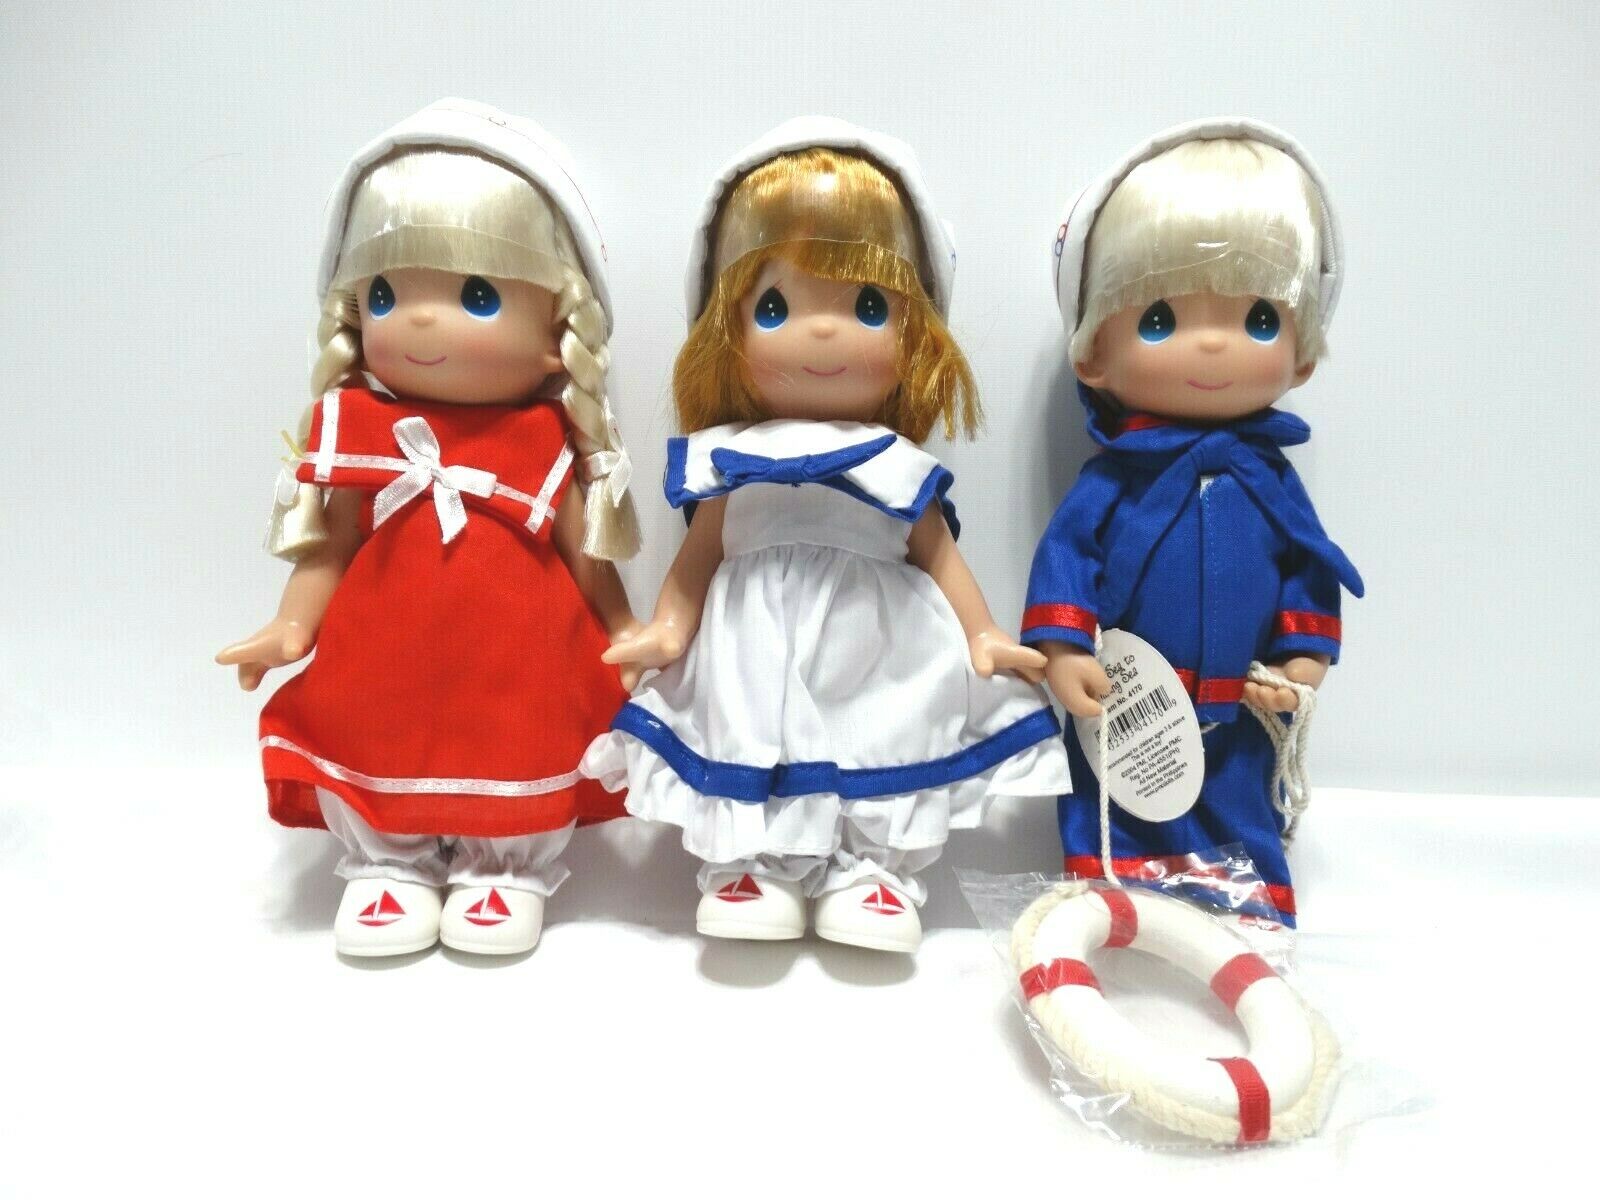 Precious Moments From Sea To Shining Sea 3 Piece 9.5" Doll Set So Adorable New